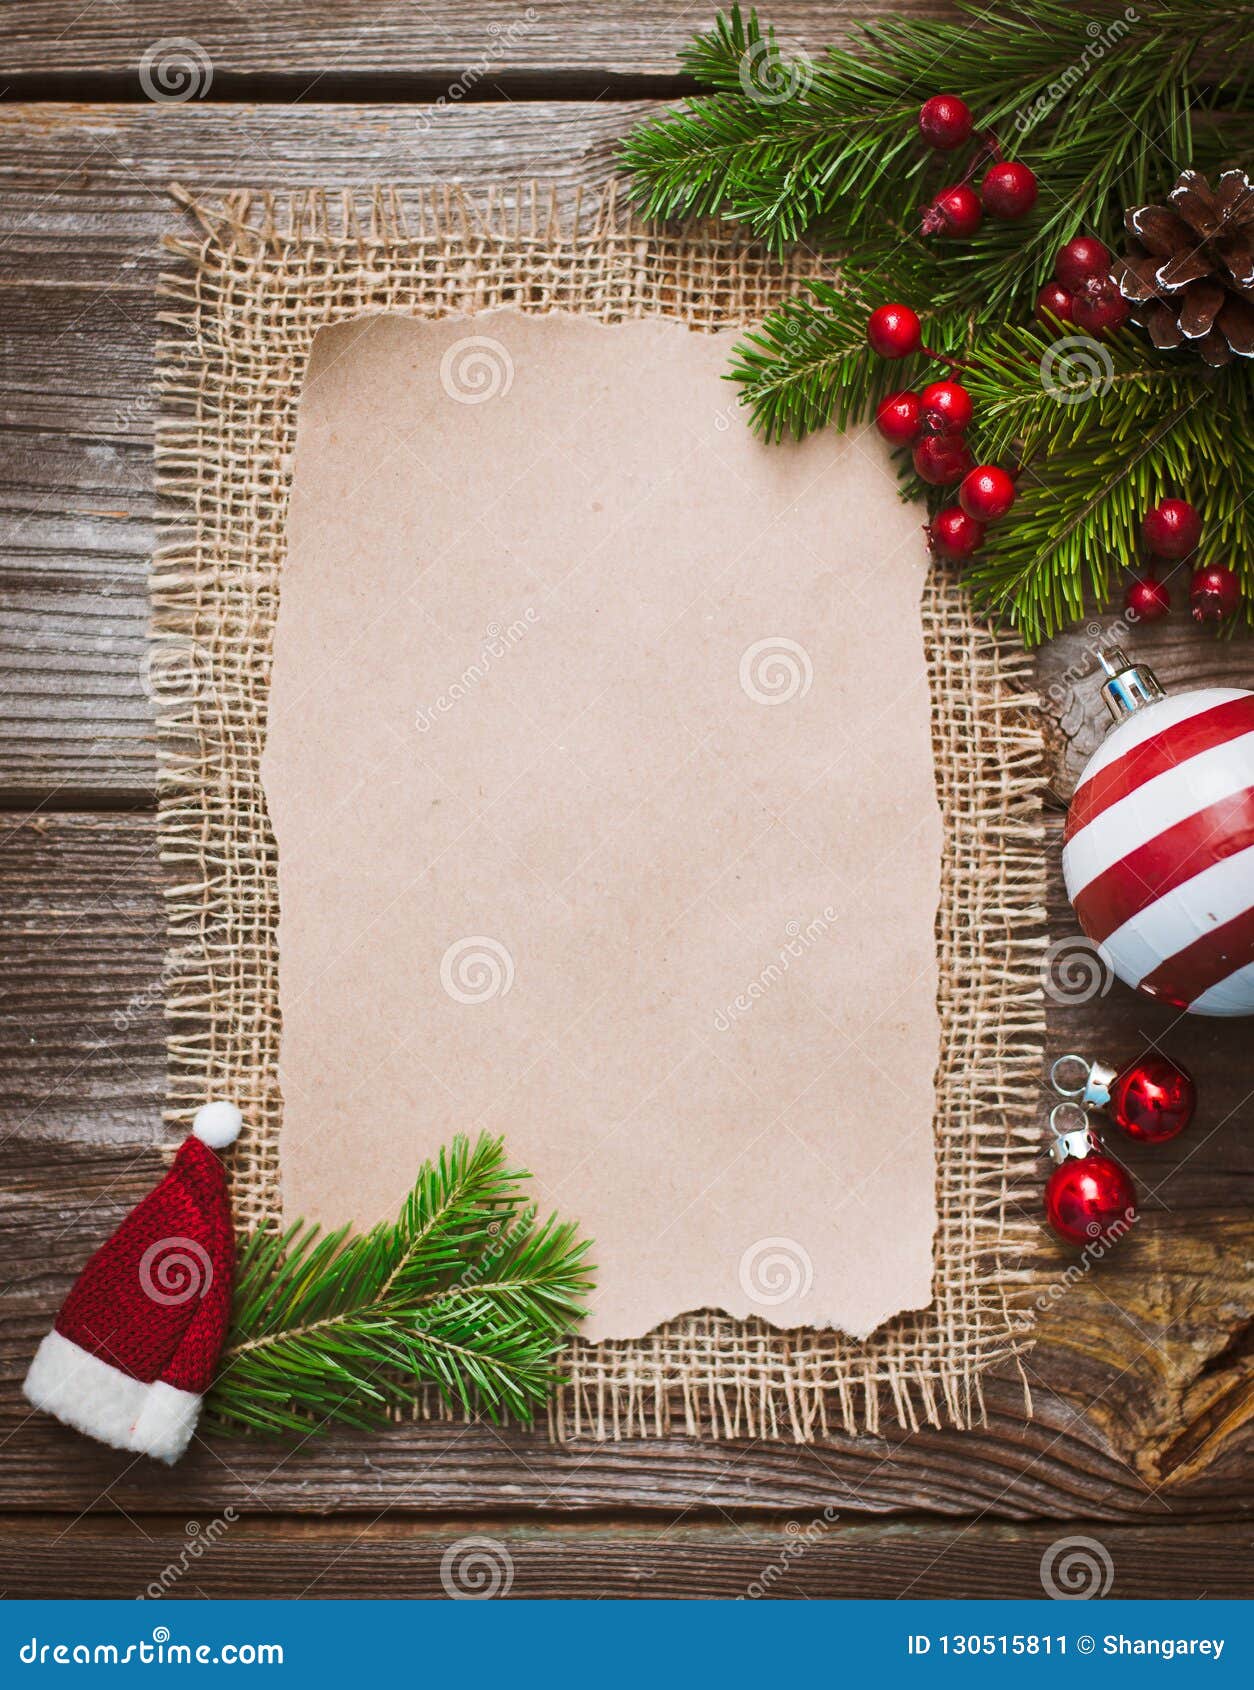 Creative 92 Background Christmas letter High-quality, free to download.